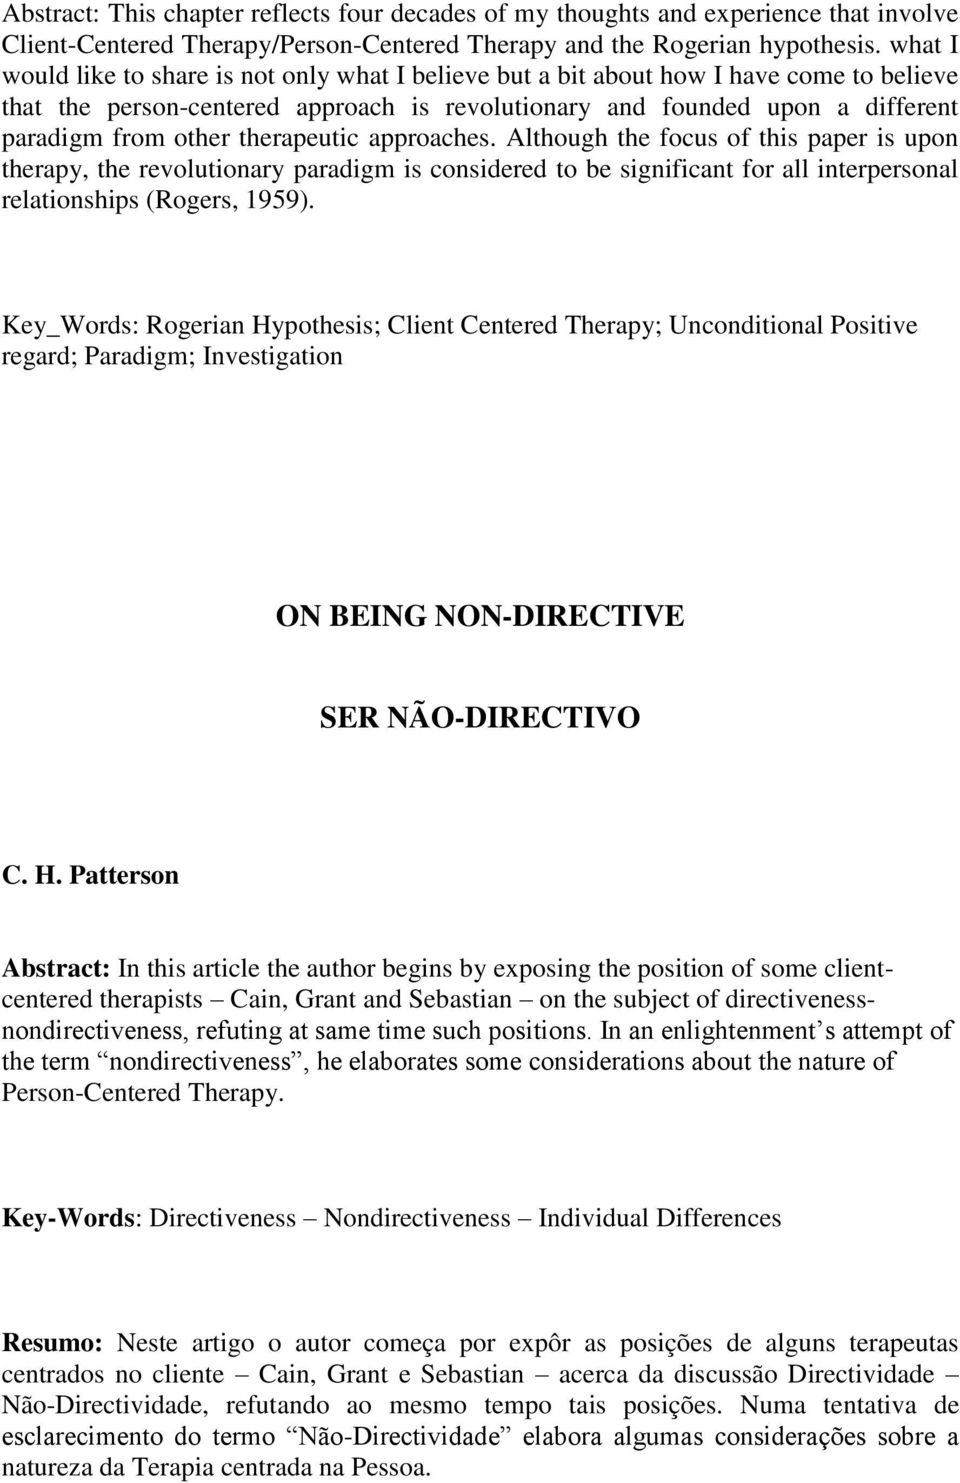 therapeutic approaches. Although the focus of this paper is upon therapy, the revolutionary paradigm is considered to be significant for all interpersonal relationships (Rogers, 1959).